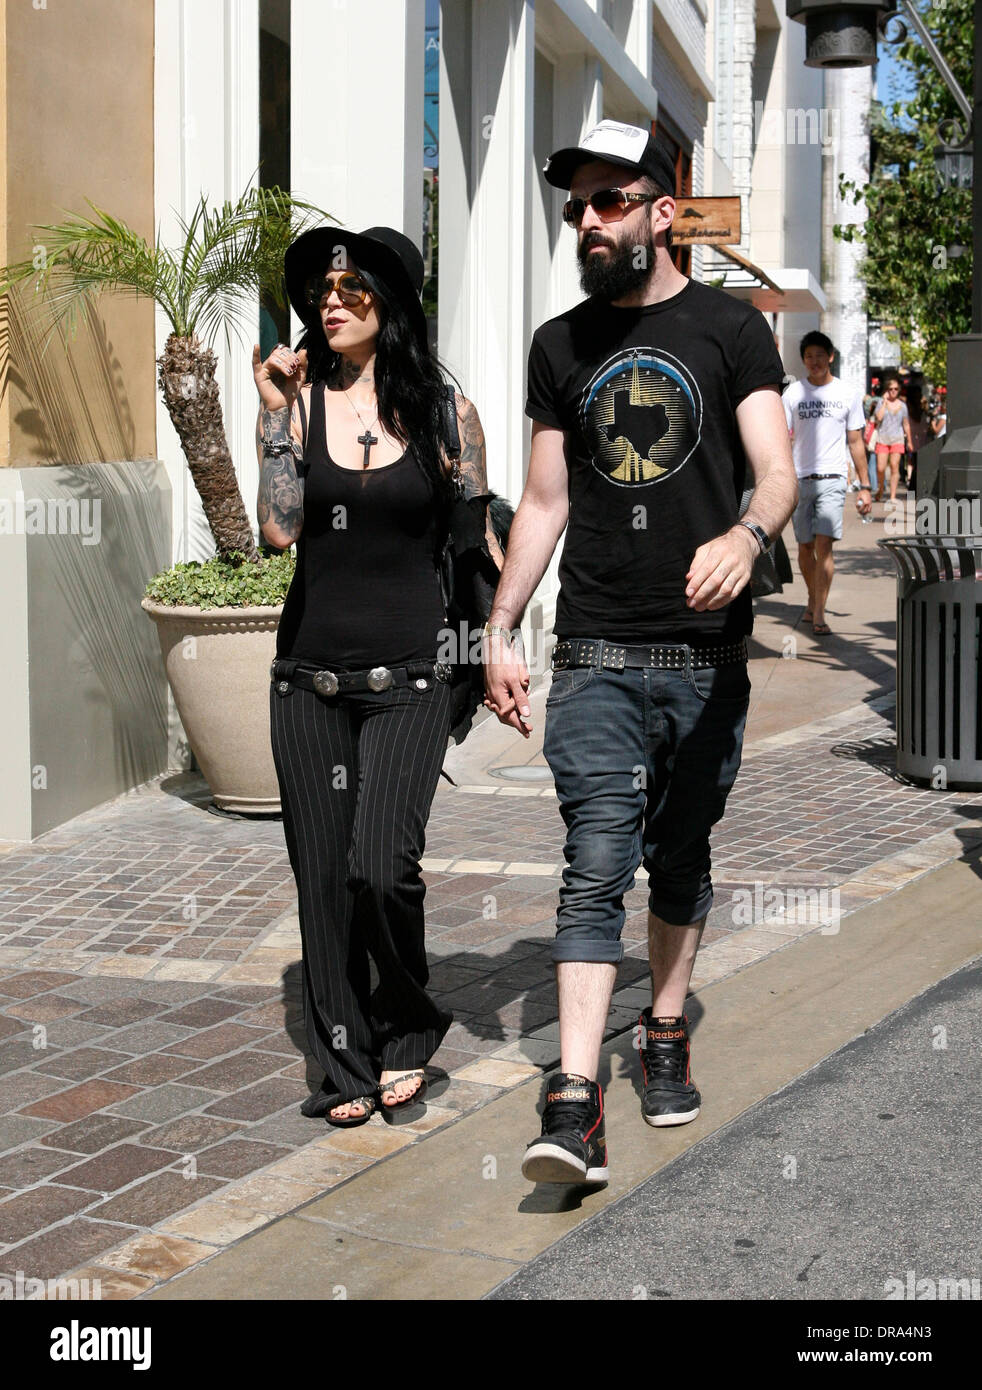 Von D her new boyfriend, English rapper, Scroobius Pip (real name David Meads) out and about in West Hollywood West Hollywood, California - 30.06.12 Stock Photo - Alamy